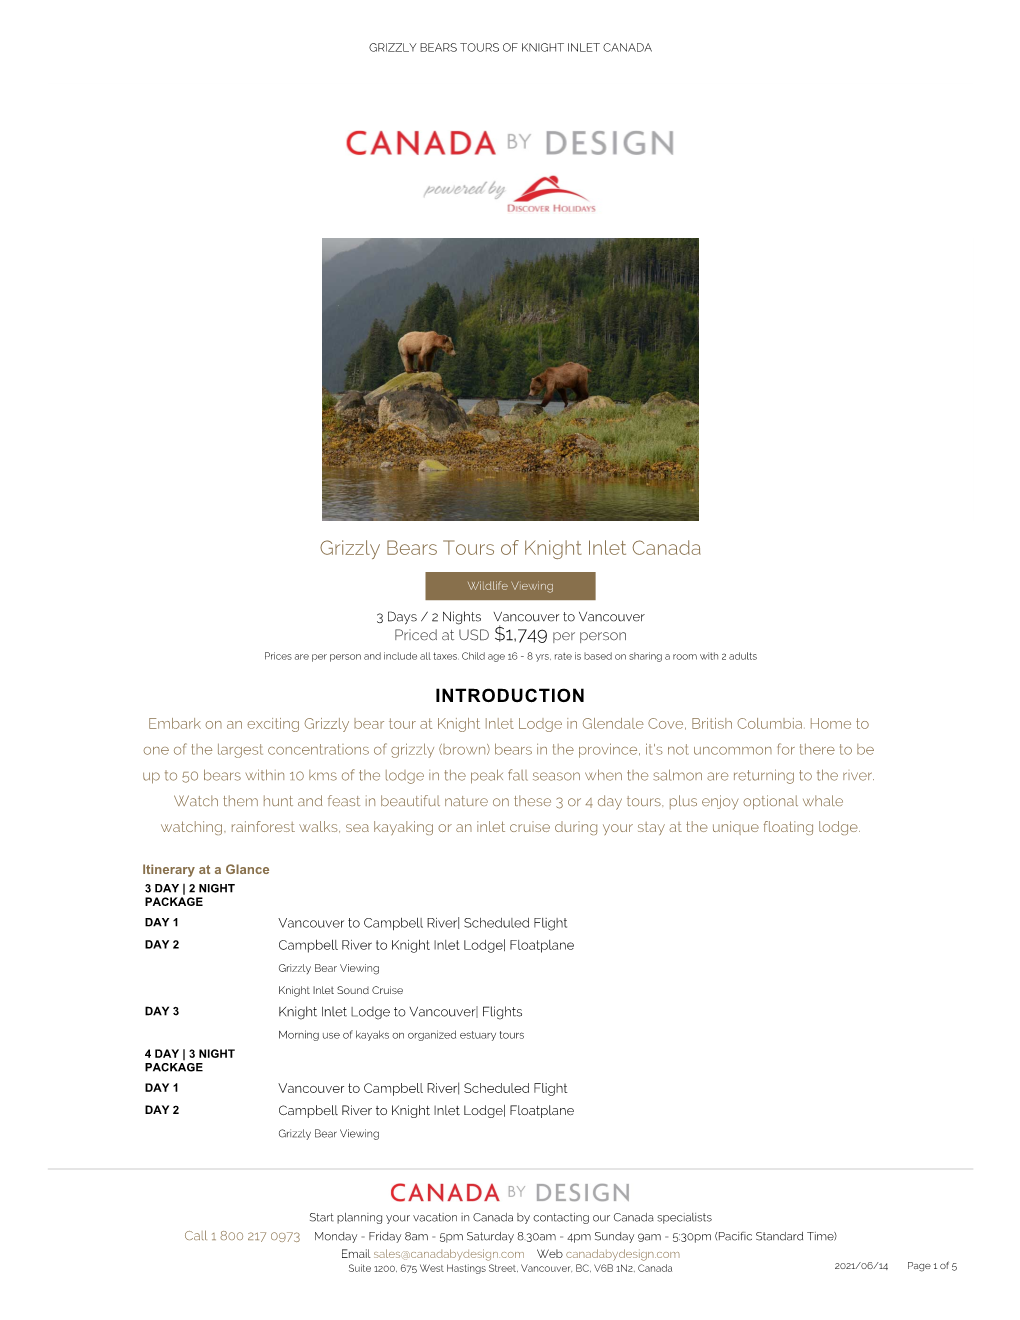 Grizzly Bears Tours of Knight Inlet Canada